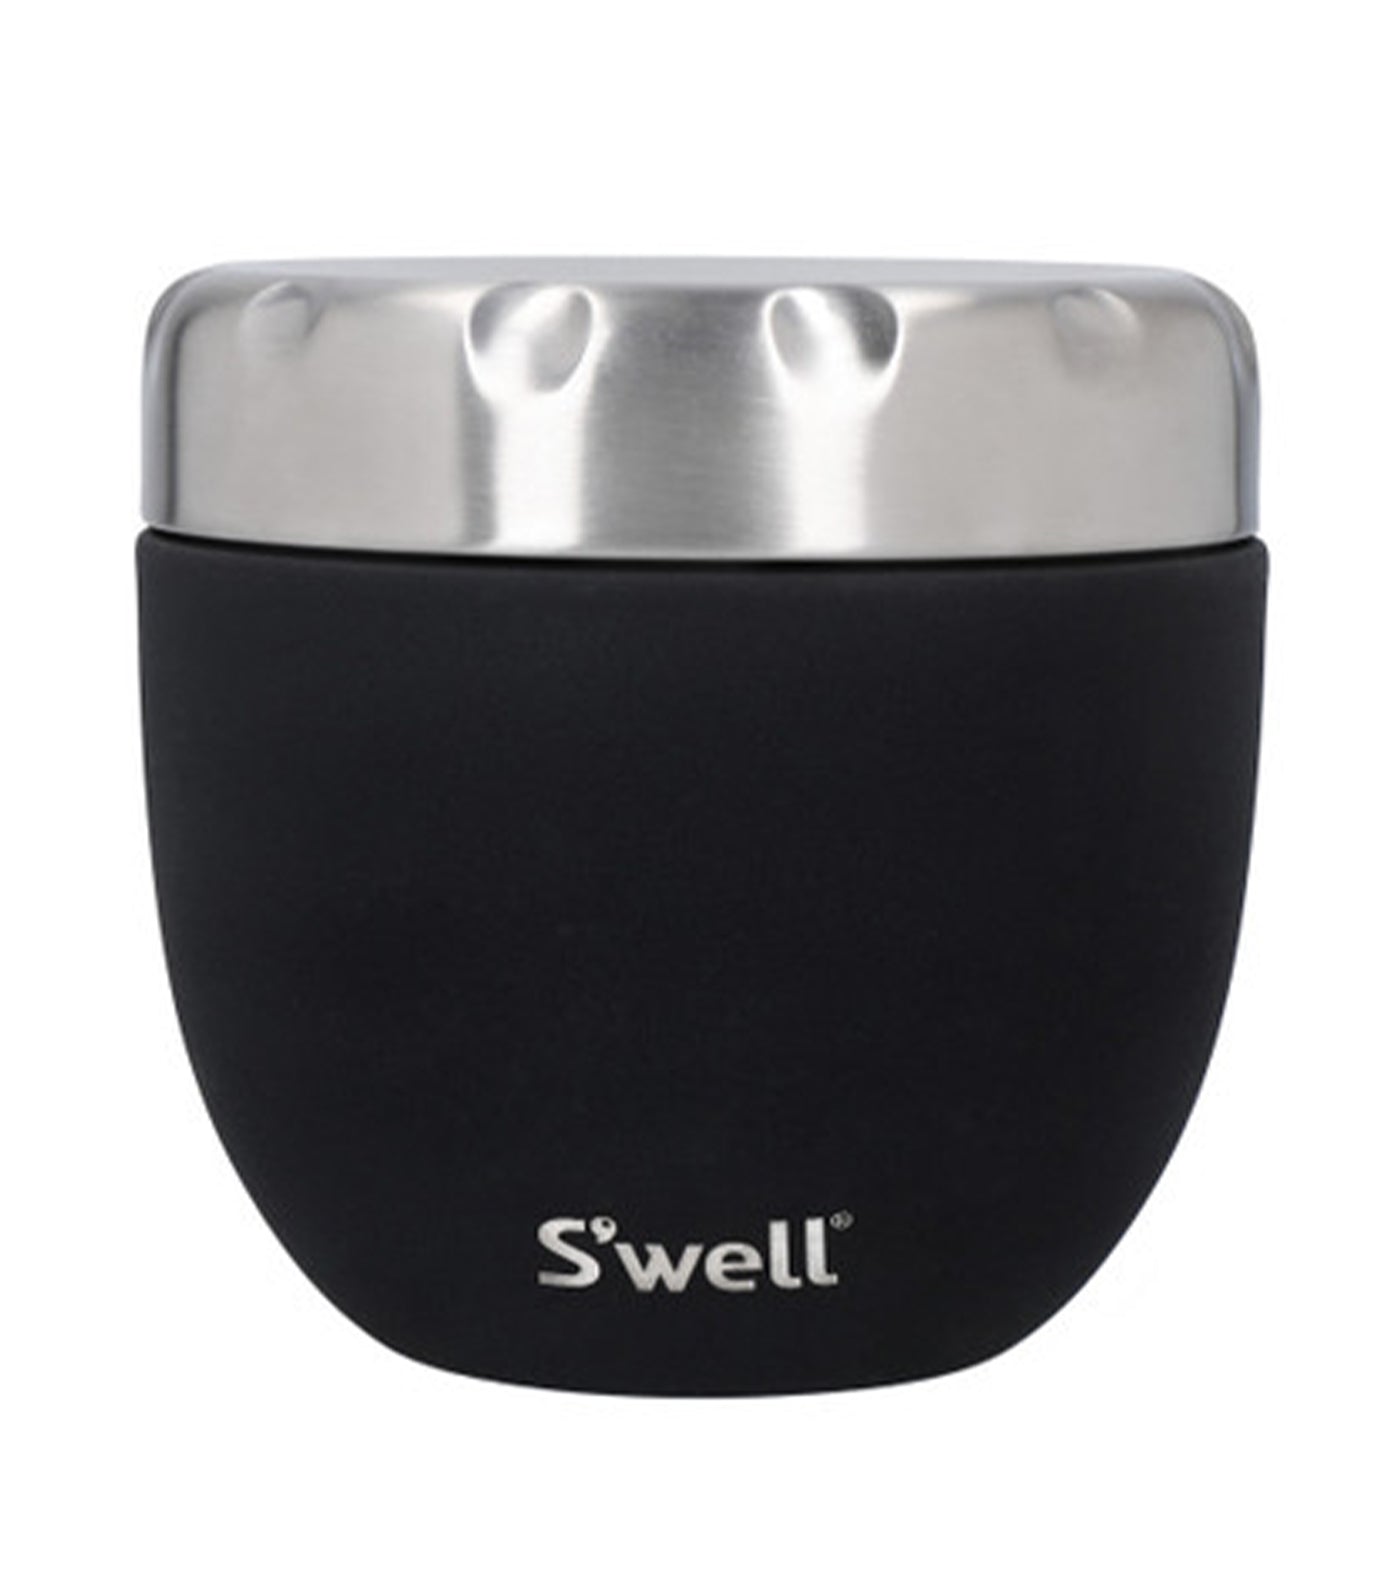 S'well Stainless Steel Salad Bowl Kit - 64oz, Azurite - Comes with 2oz  Condiment Container and Removable Tray for Organization - Leak-Proof, Easy  to